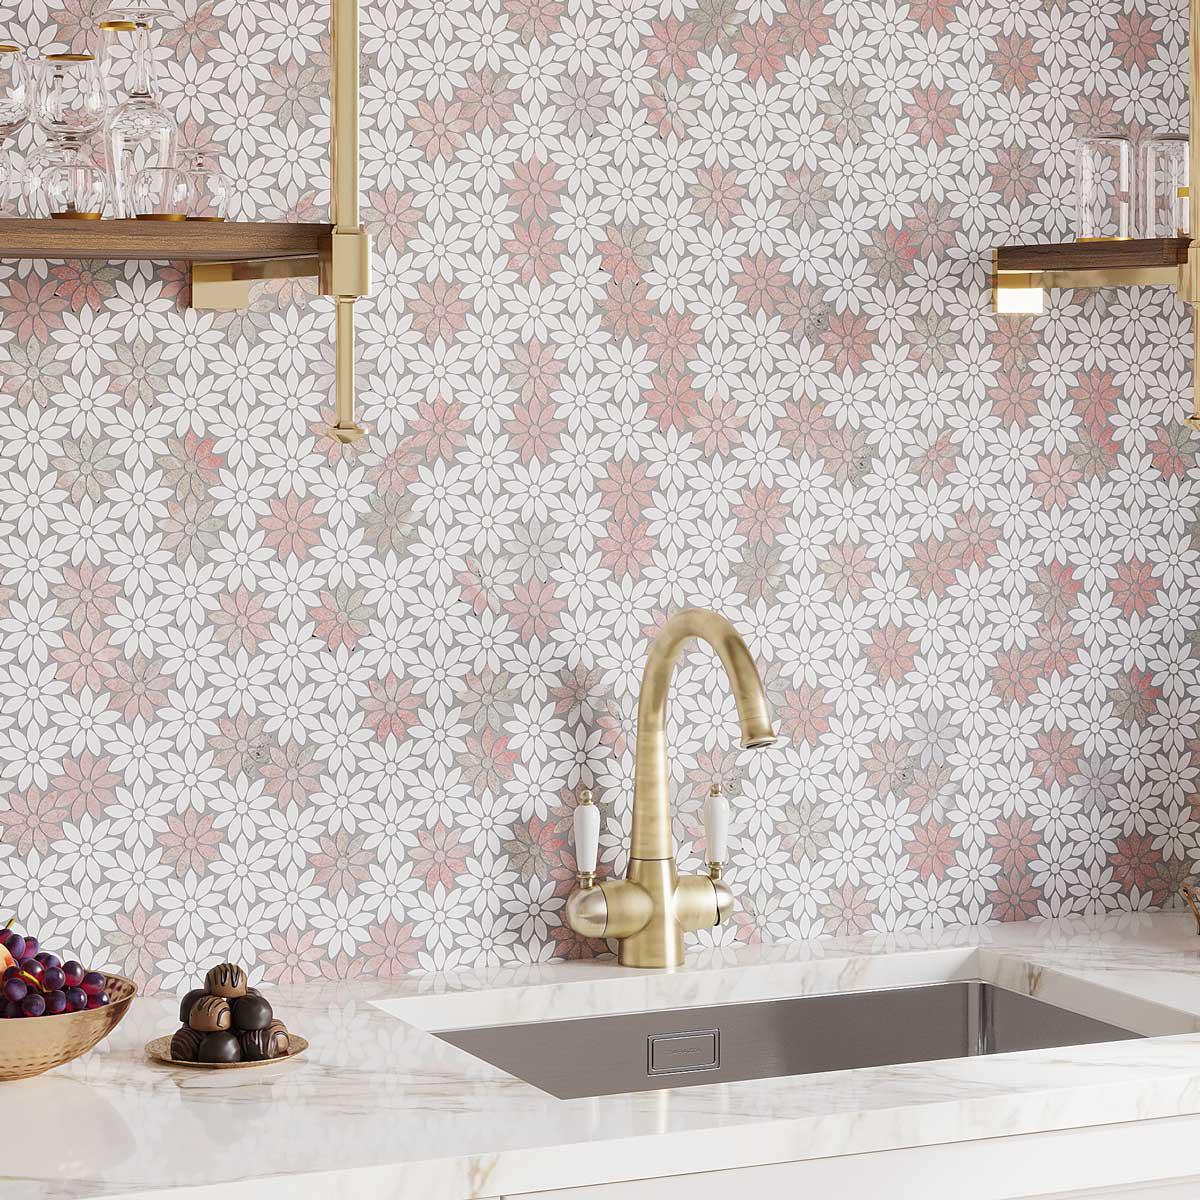 Floral pattern accent wall made of white and pink marble mosaic tiles